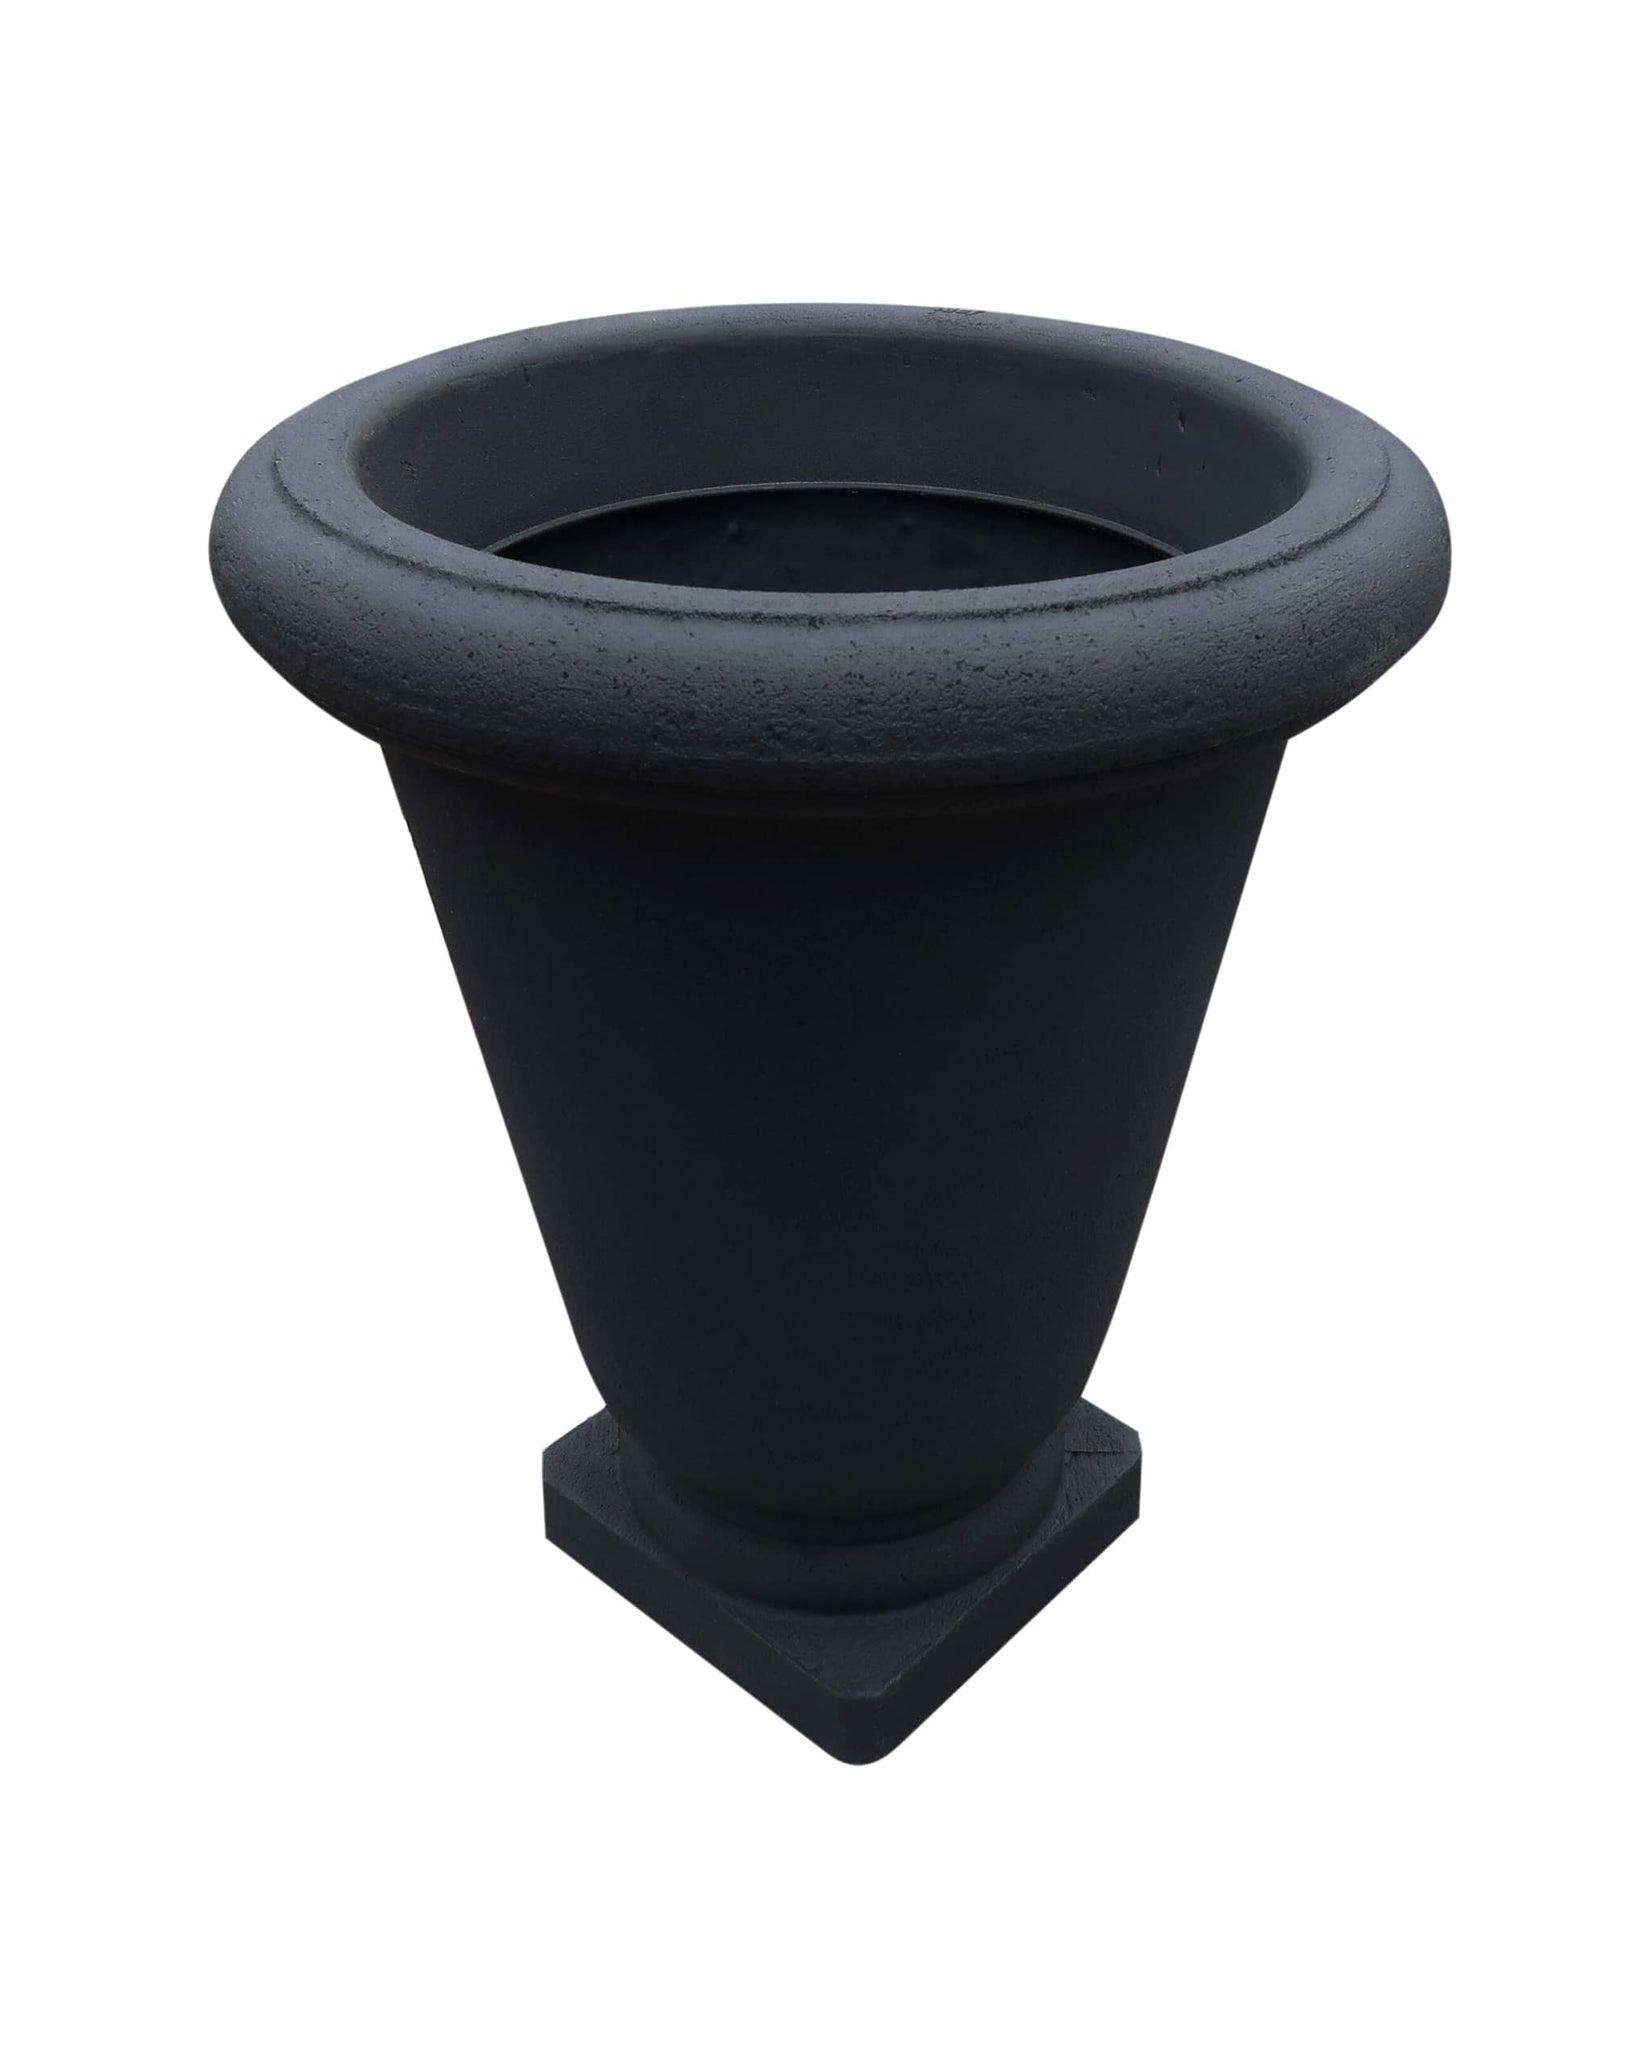 Bell Urn Japi Planter in colour Lead (black). Angled view showing inside lip. Florastyle by Hingham